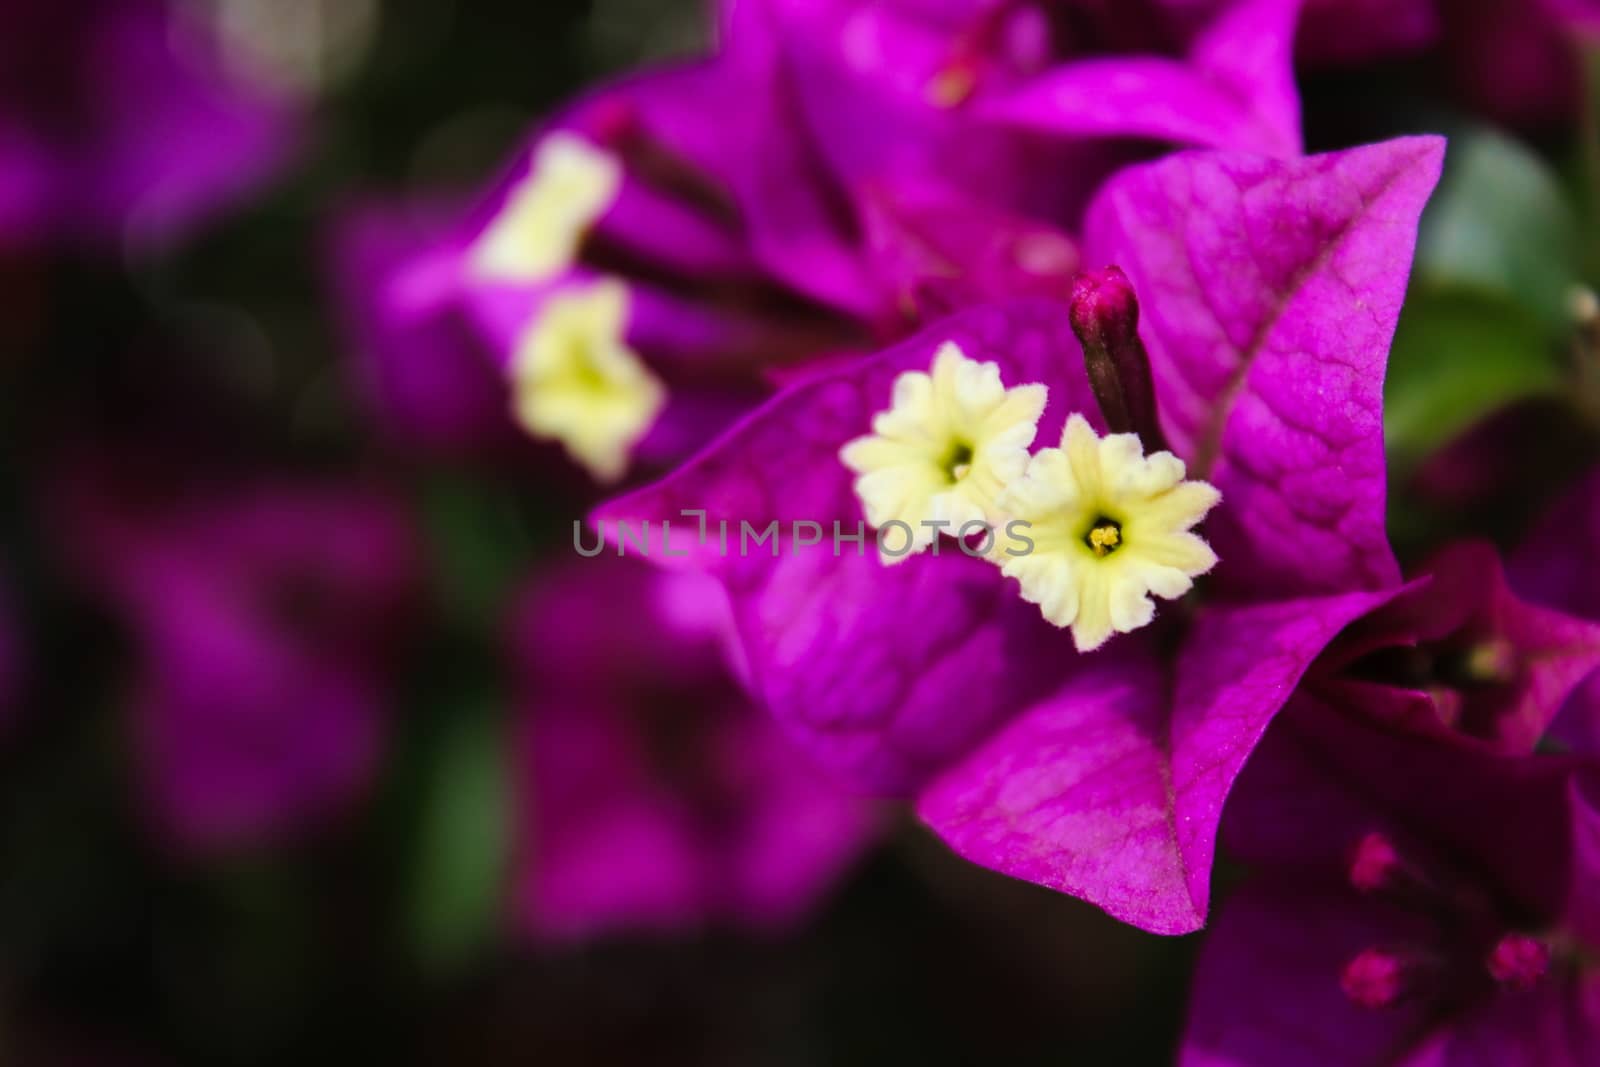 The beautiful flower of Great bougainvillea, Bougainvillea spectabilis in Portugal. by mahirrov